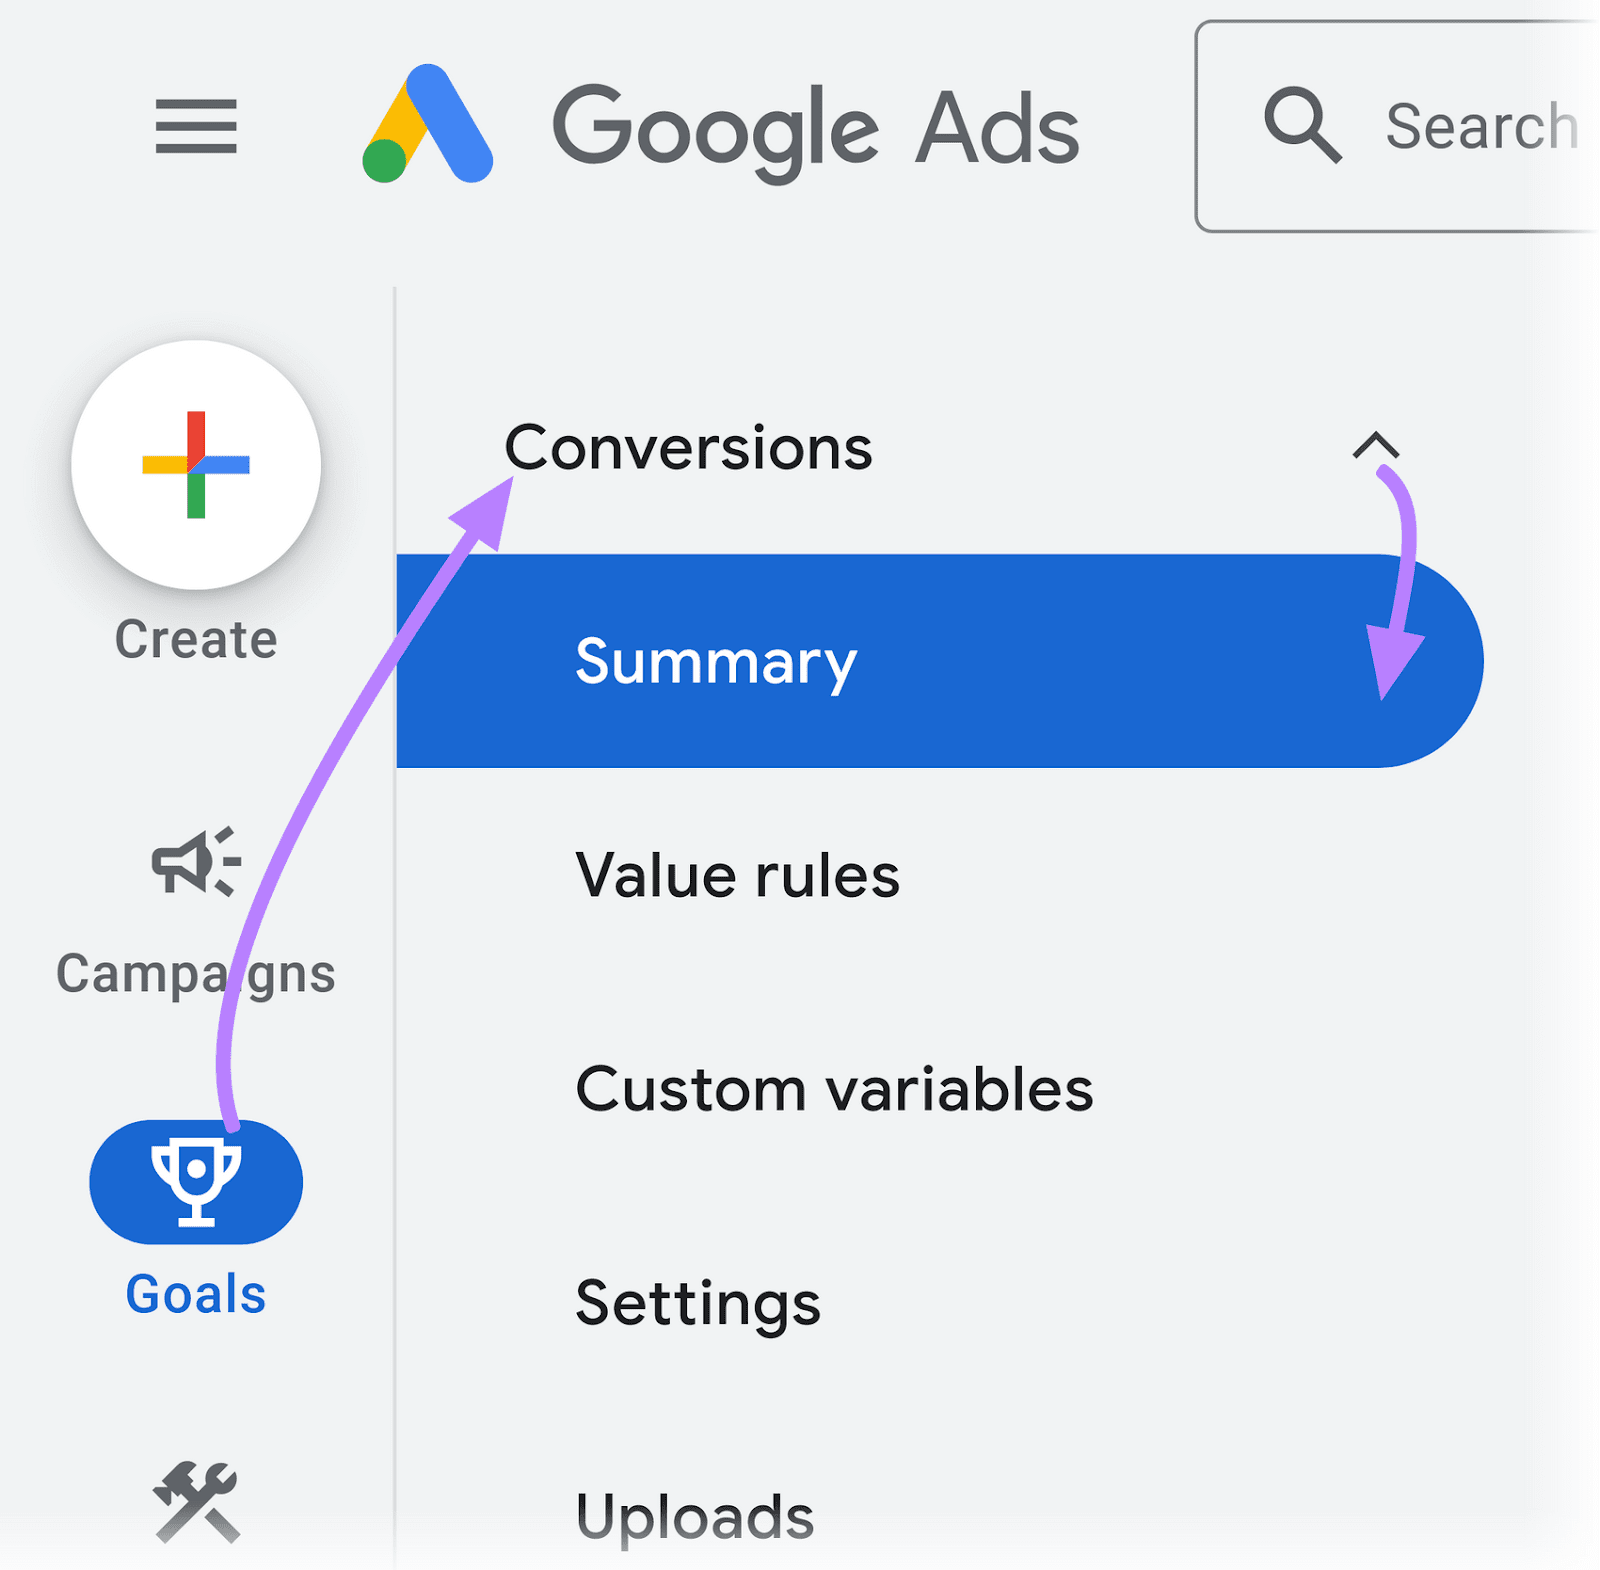 8 Google Ads Best Practices to Maximize Return on Ad Spend